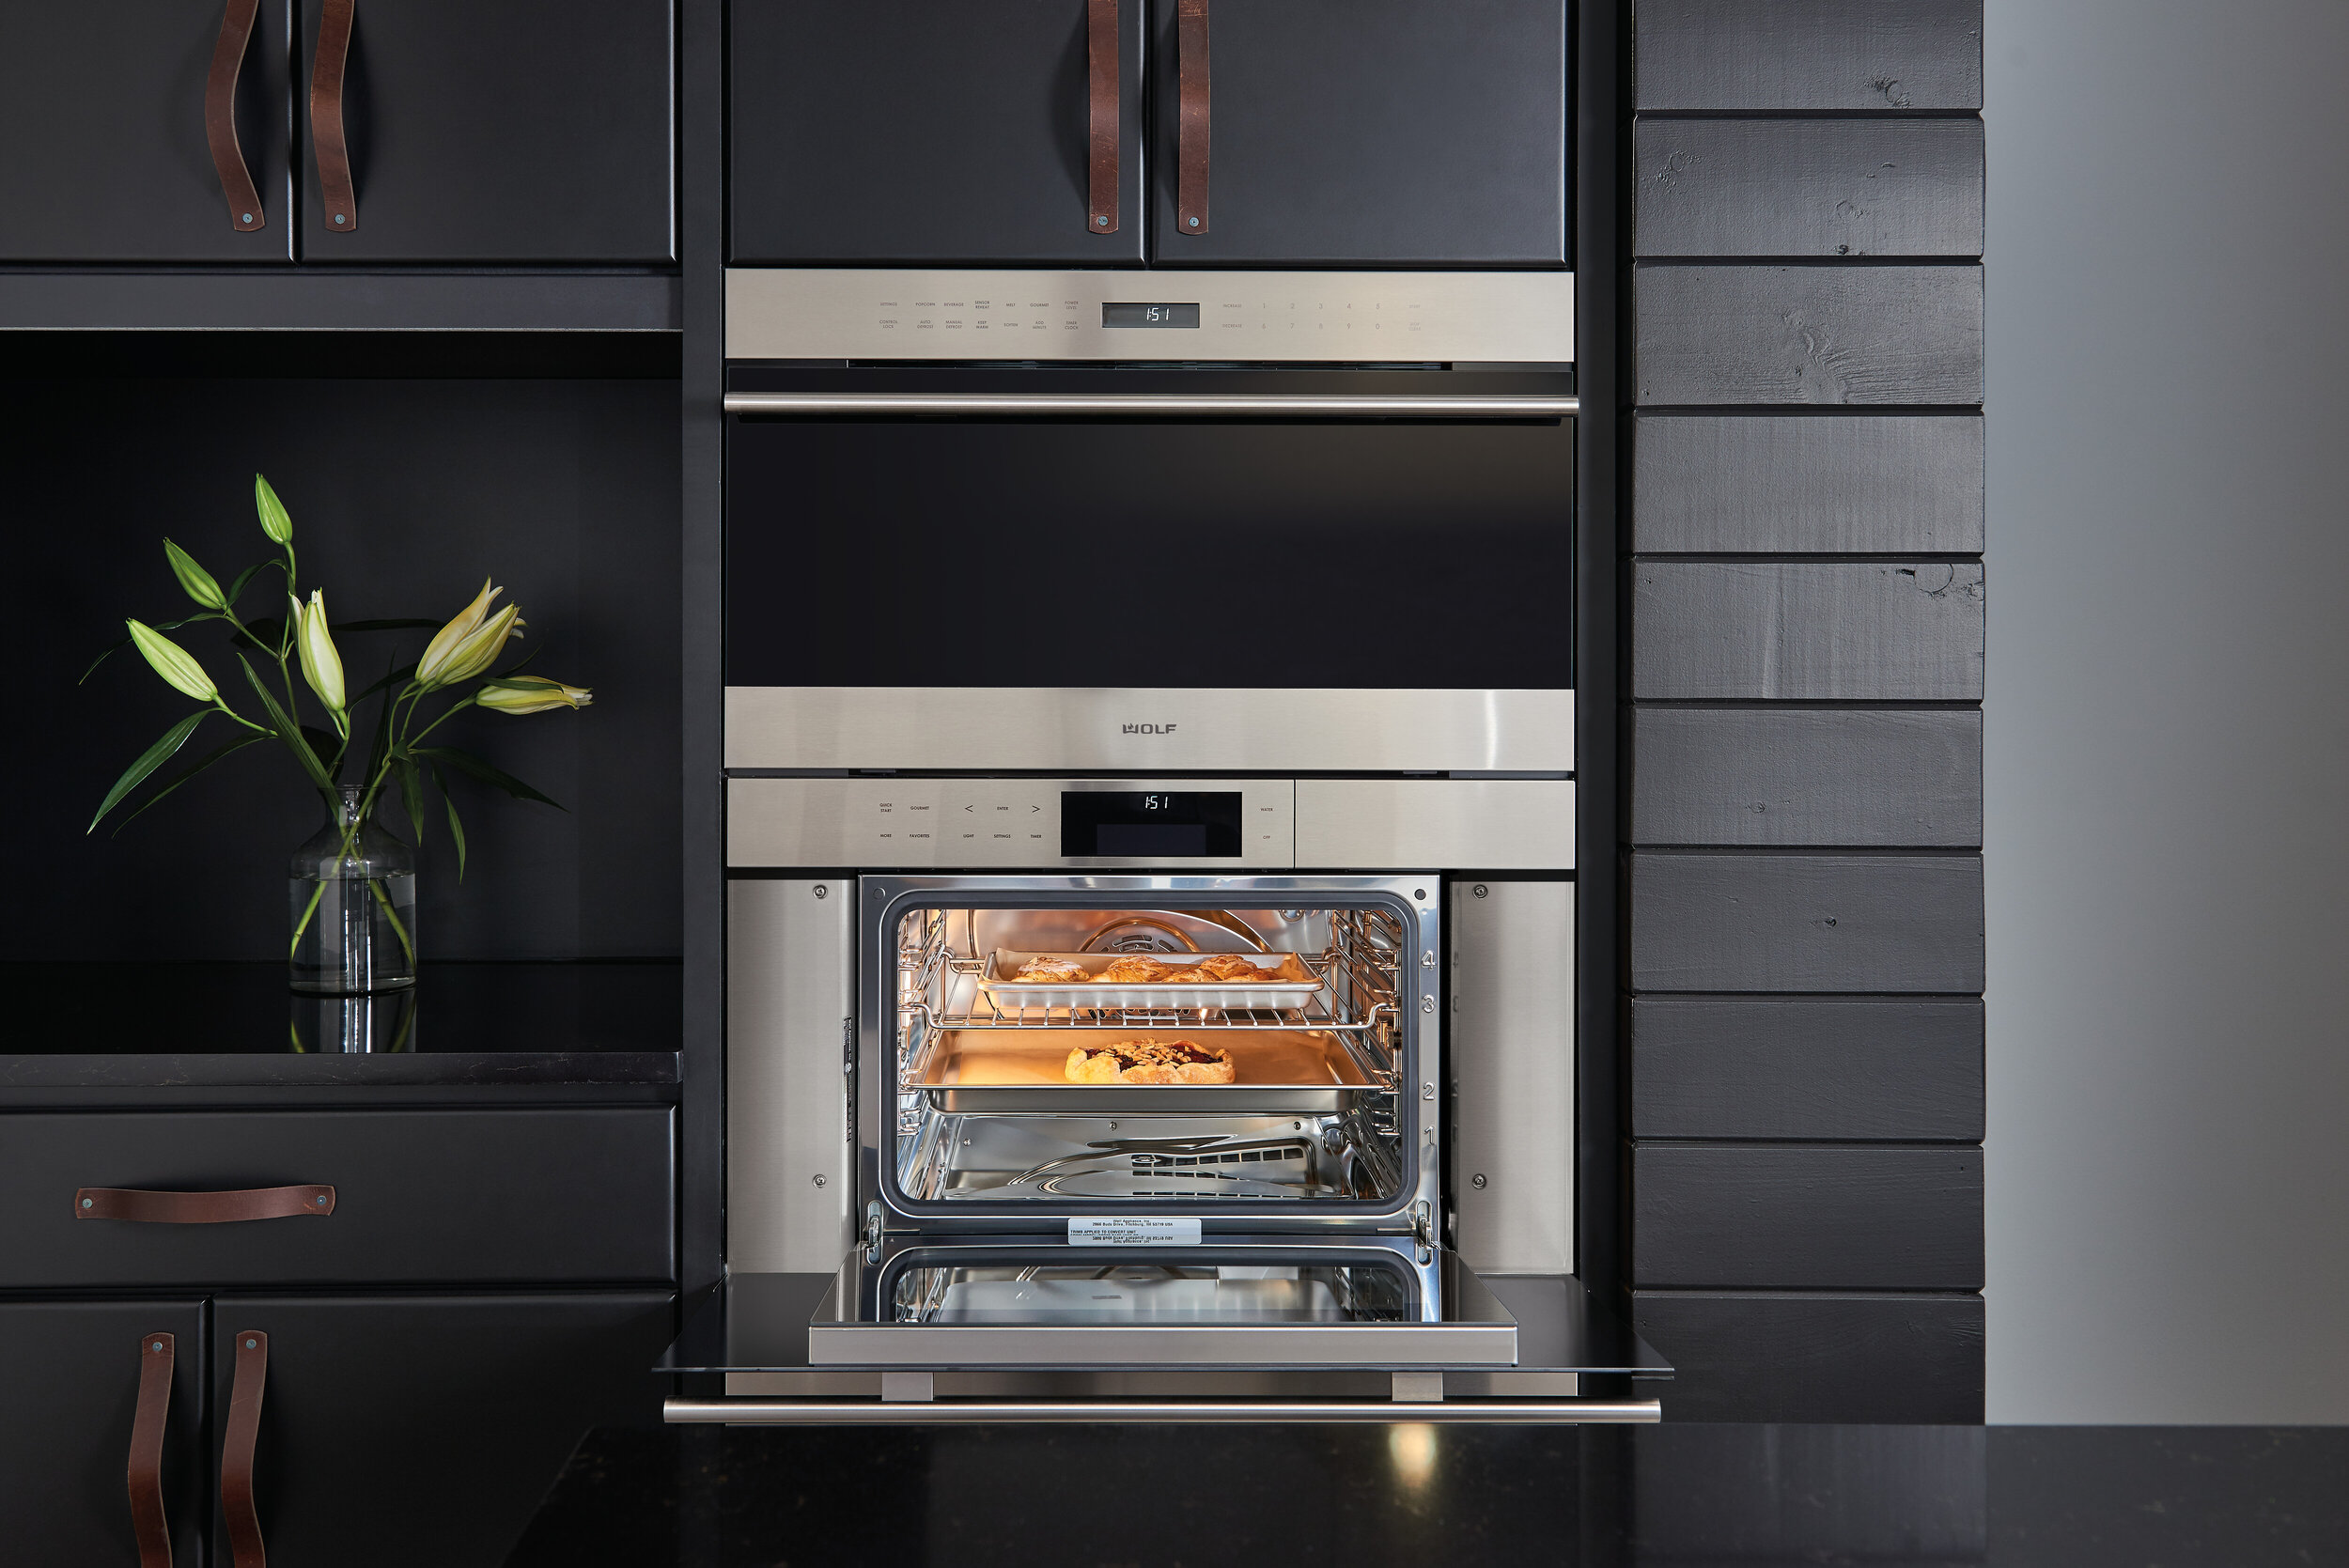 Steam Convection Ovens